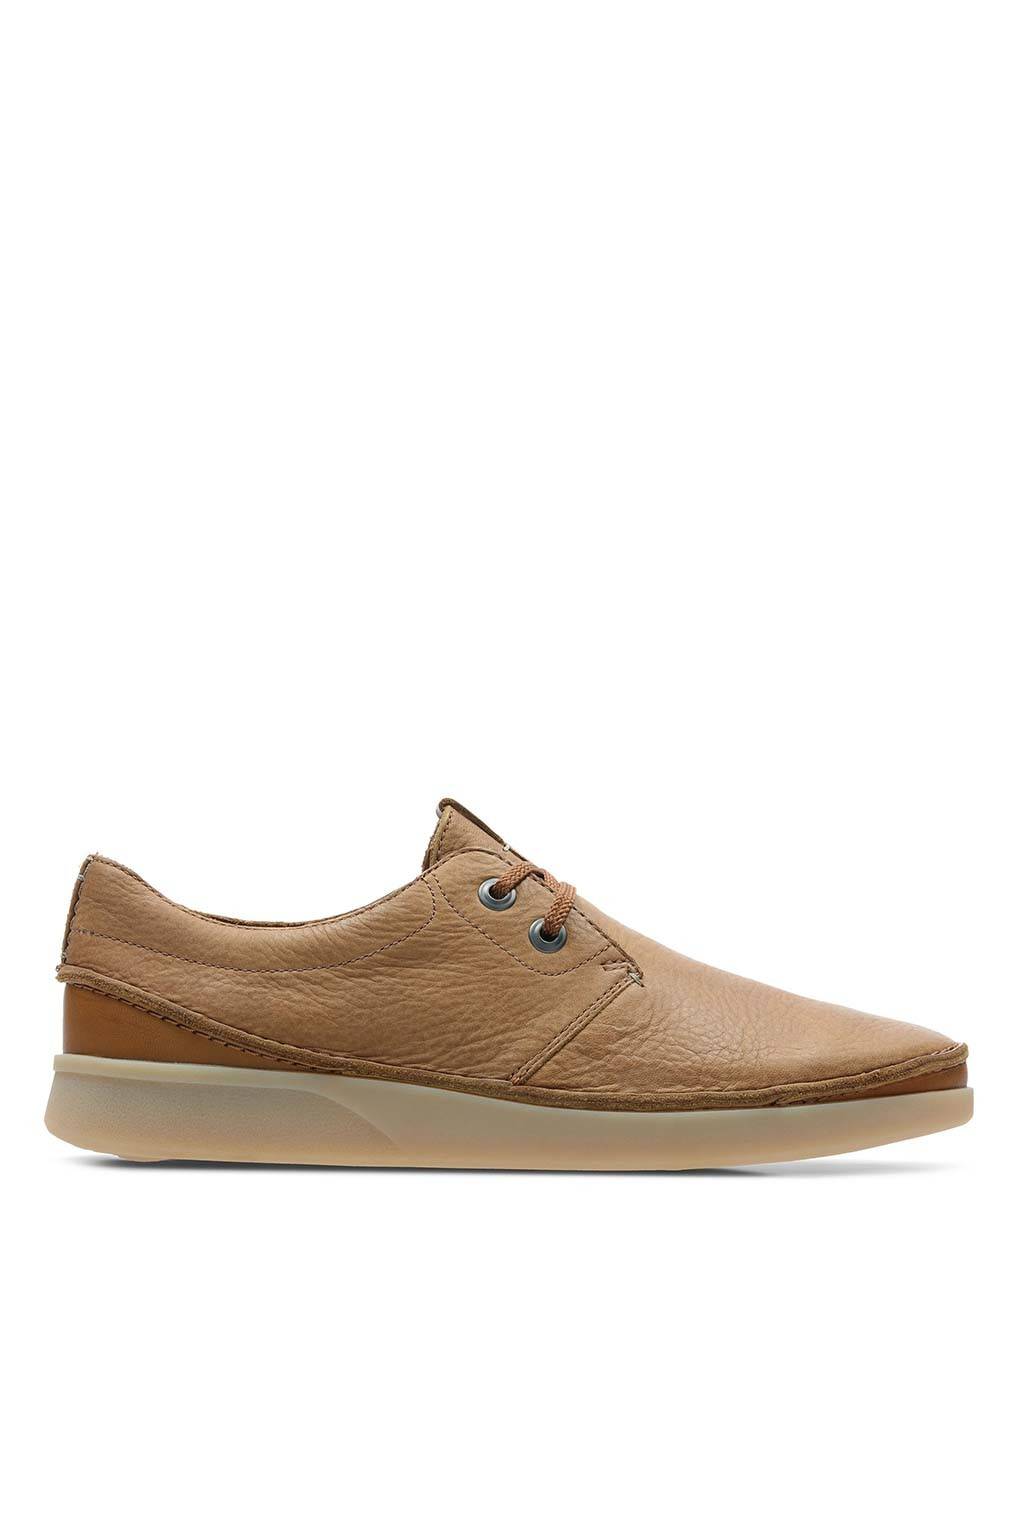 Clarks Oakland Lace Tan leather